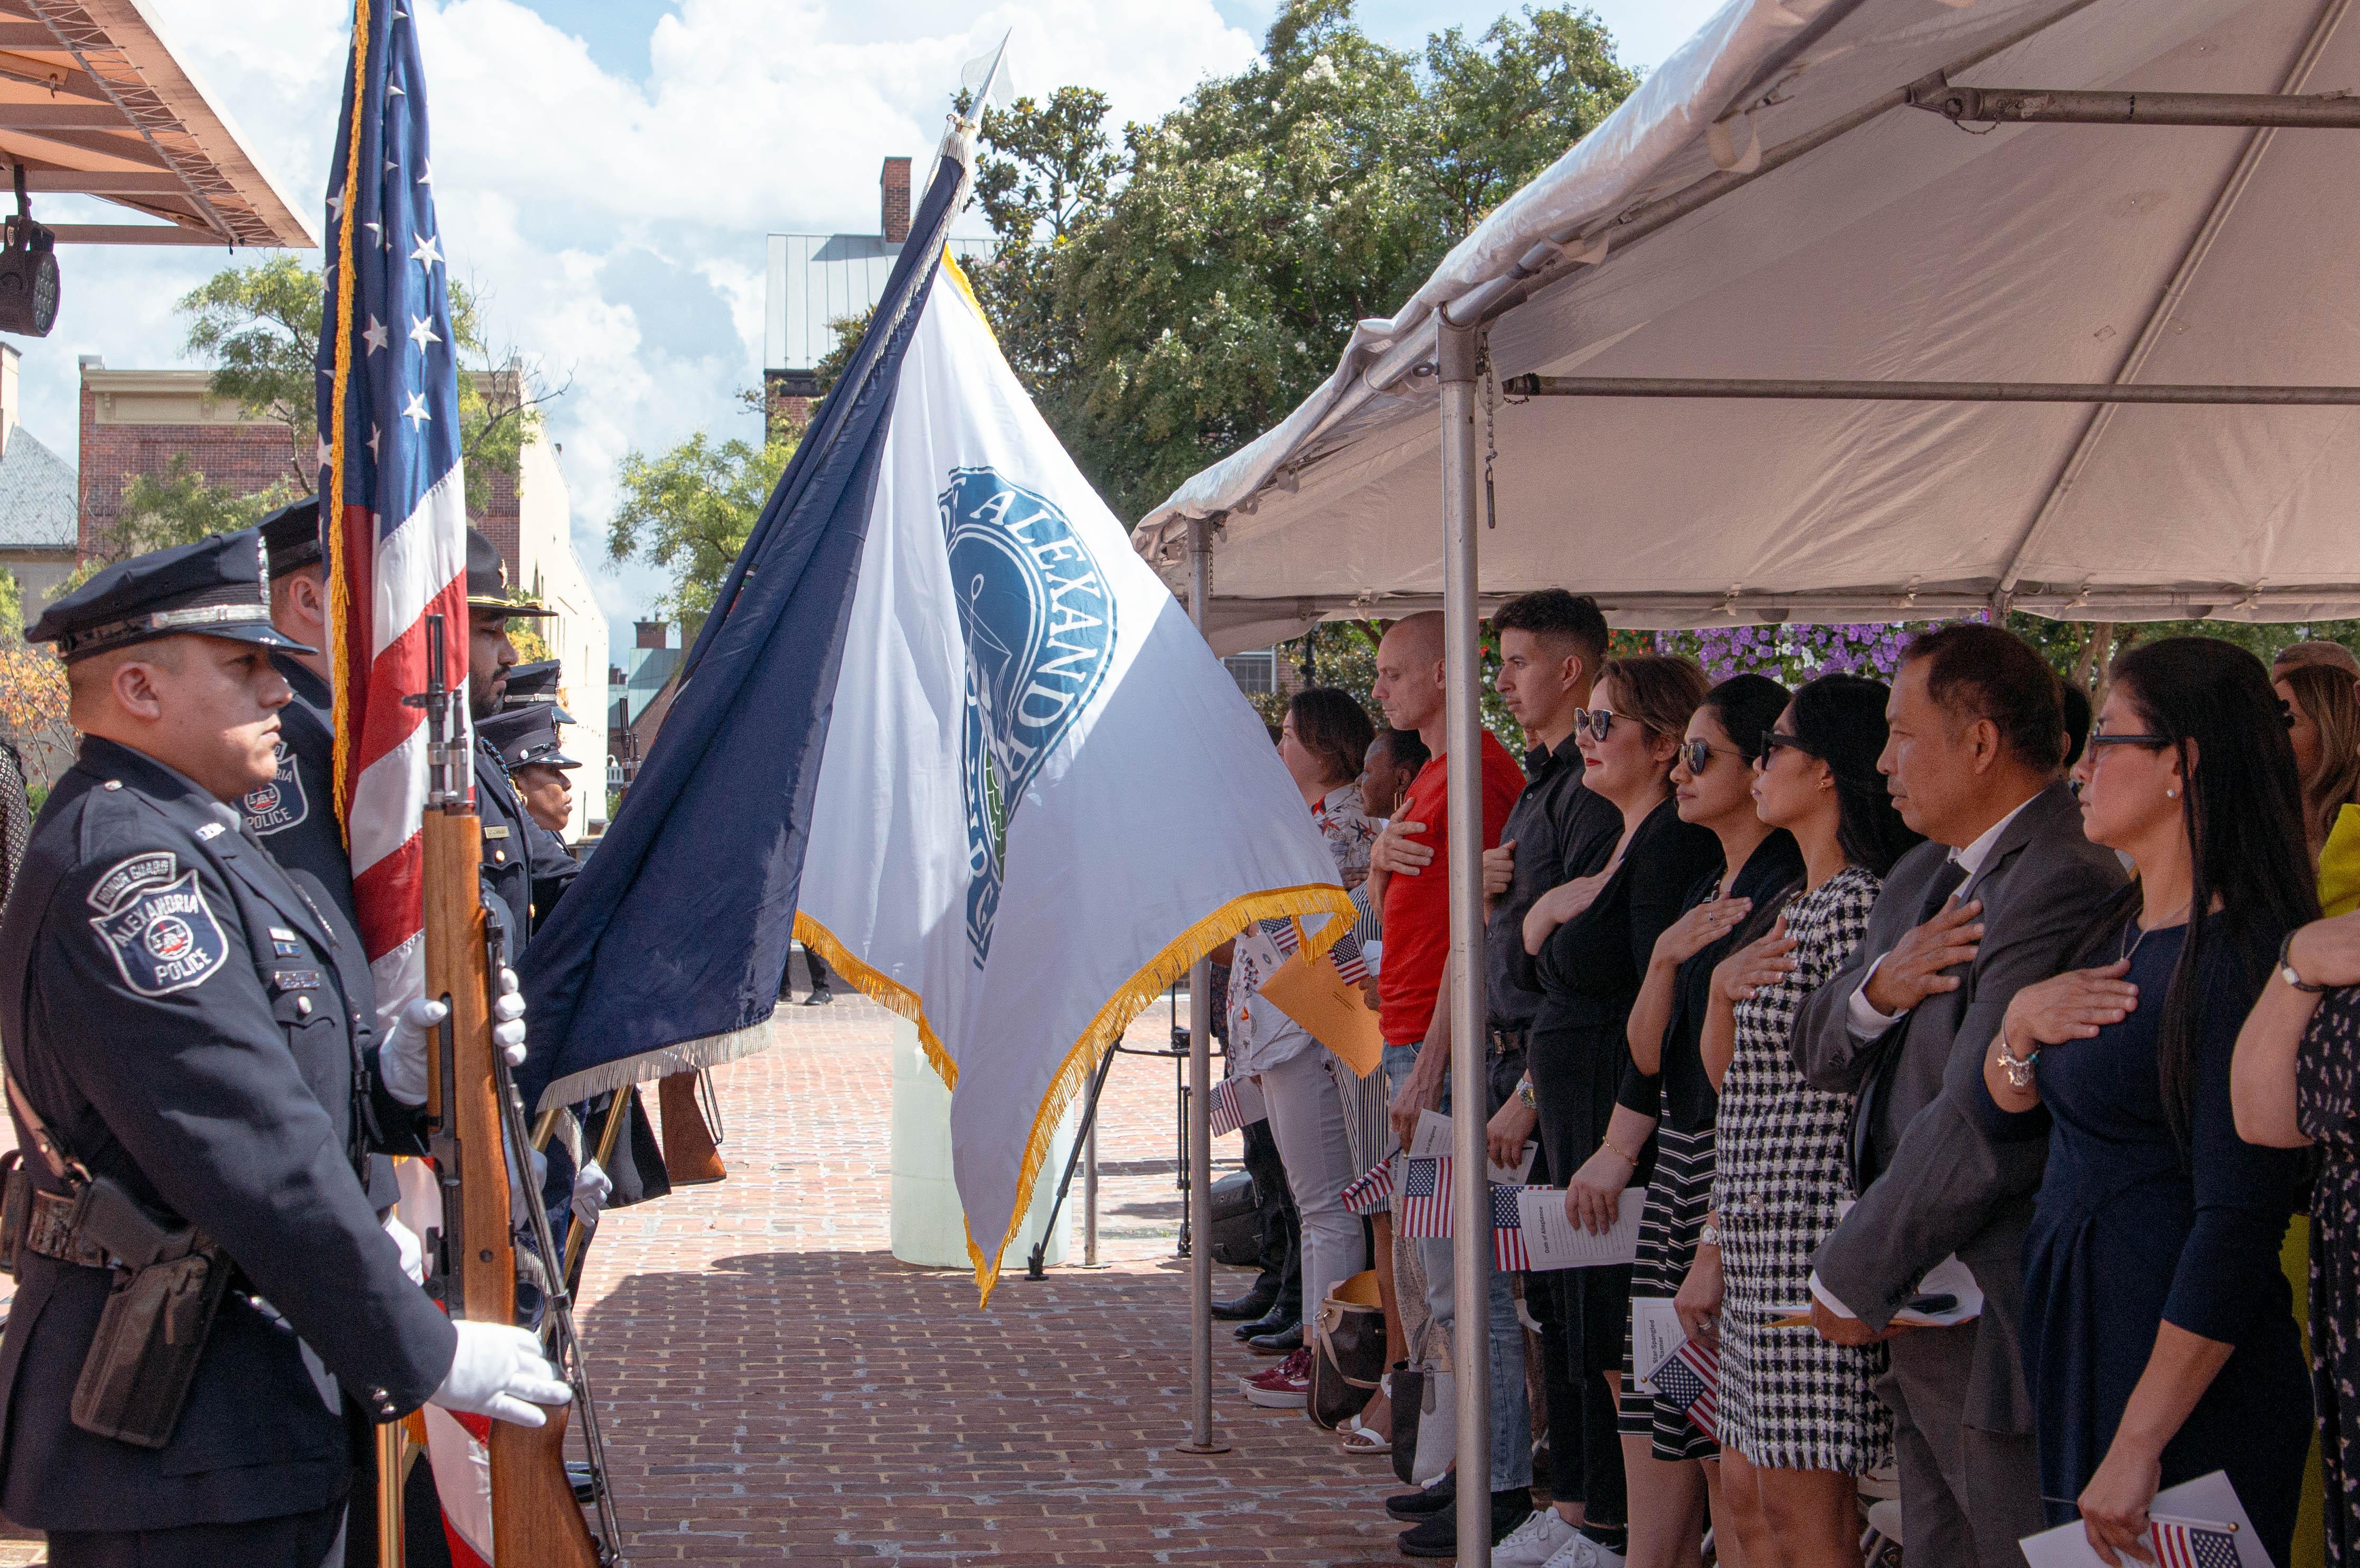 25 new United States citizens taking their Oath of Allegiance on Tuesday, September 12, in Market Square outside of Alexandria City Hall